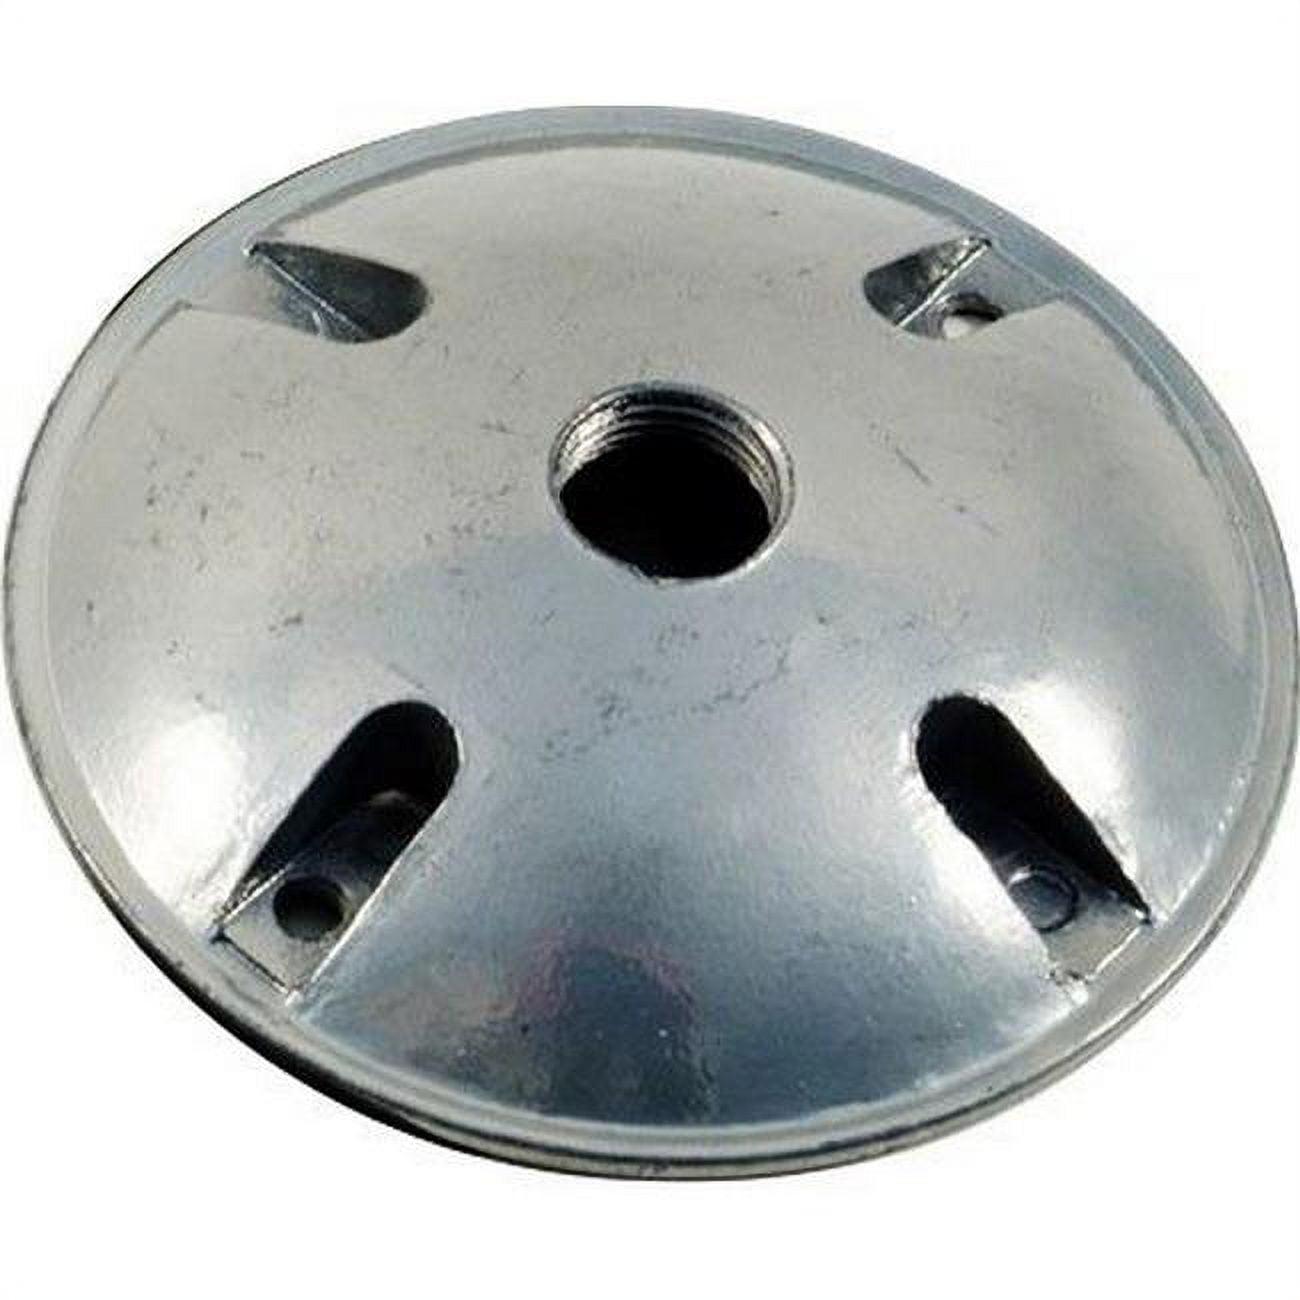 P-11-gray Round Box Cover With 0.5 In. Hole